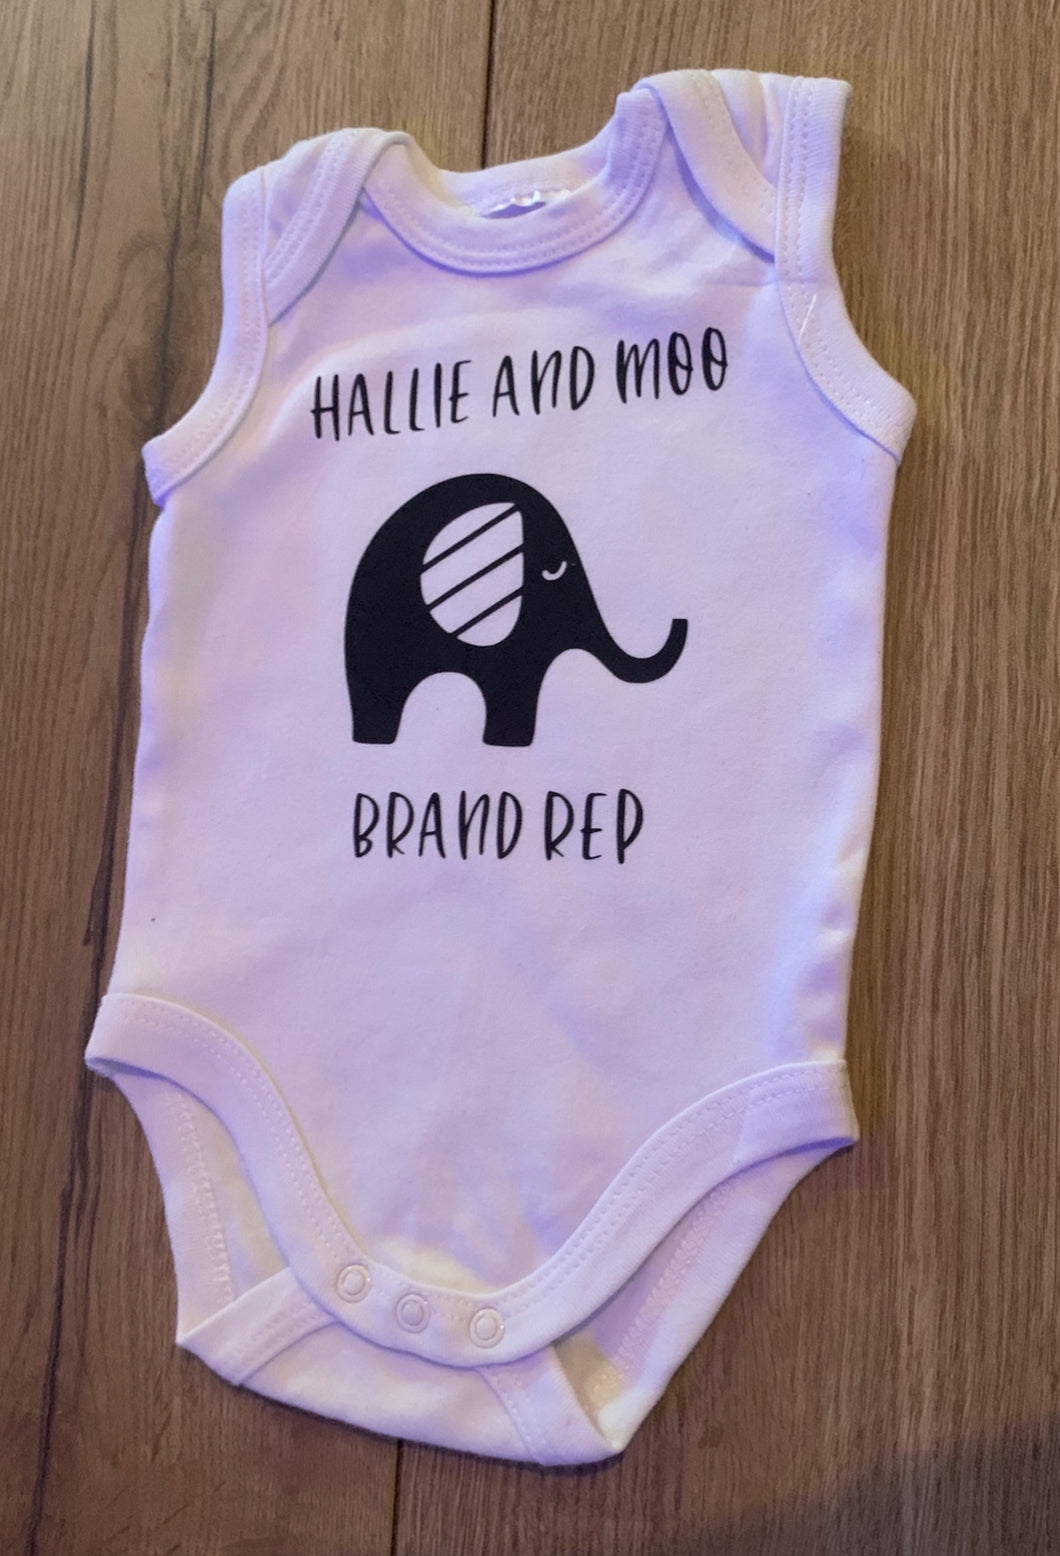 Hallie and Moo brand rep rompers and tees - can be personalised with your child’s name